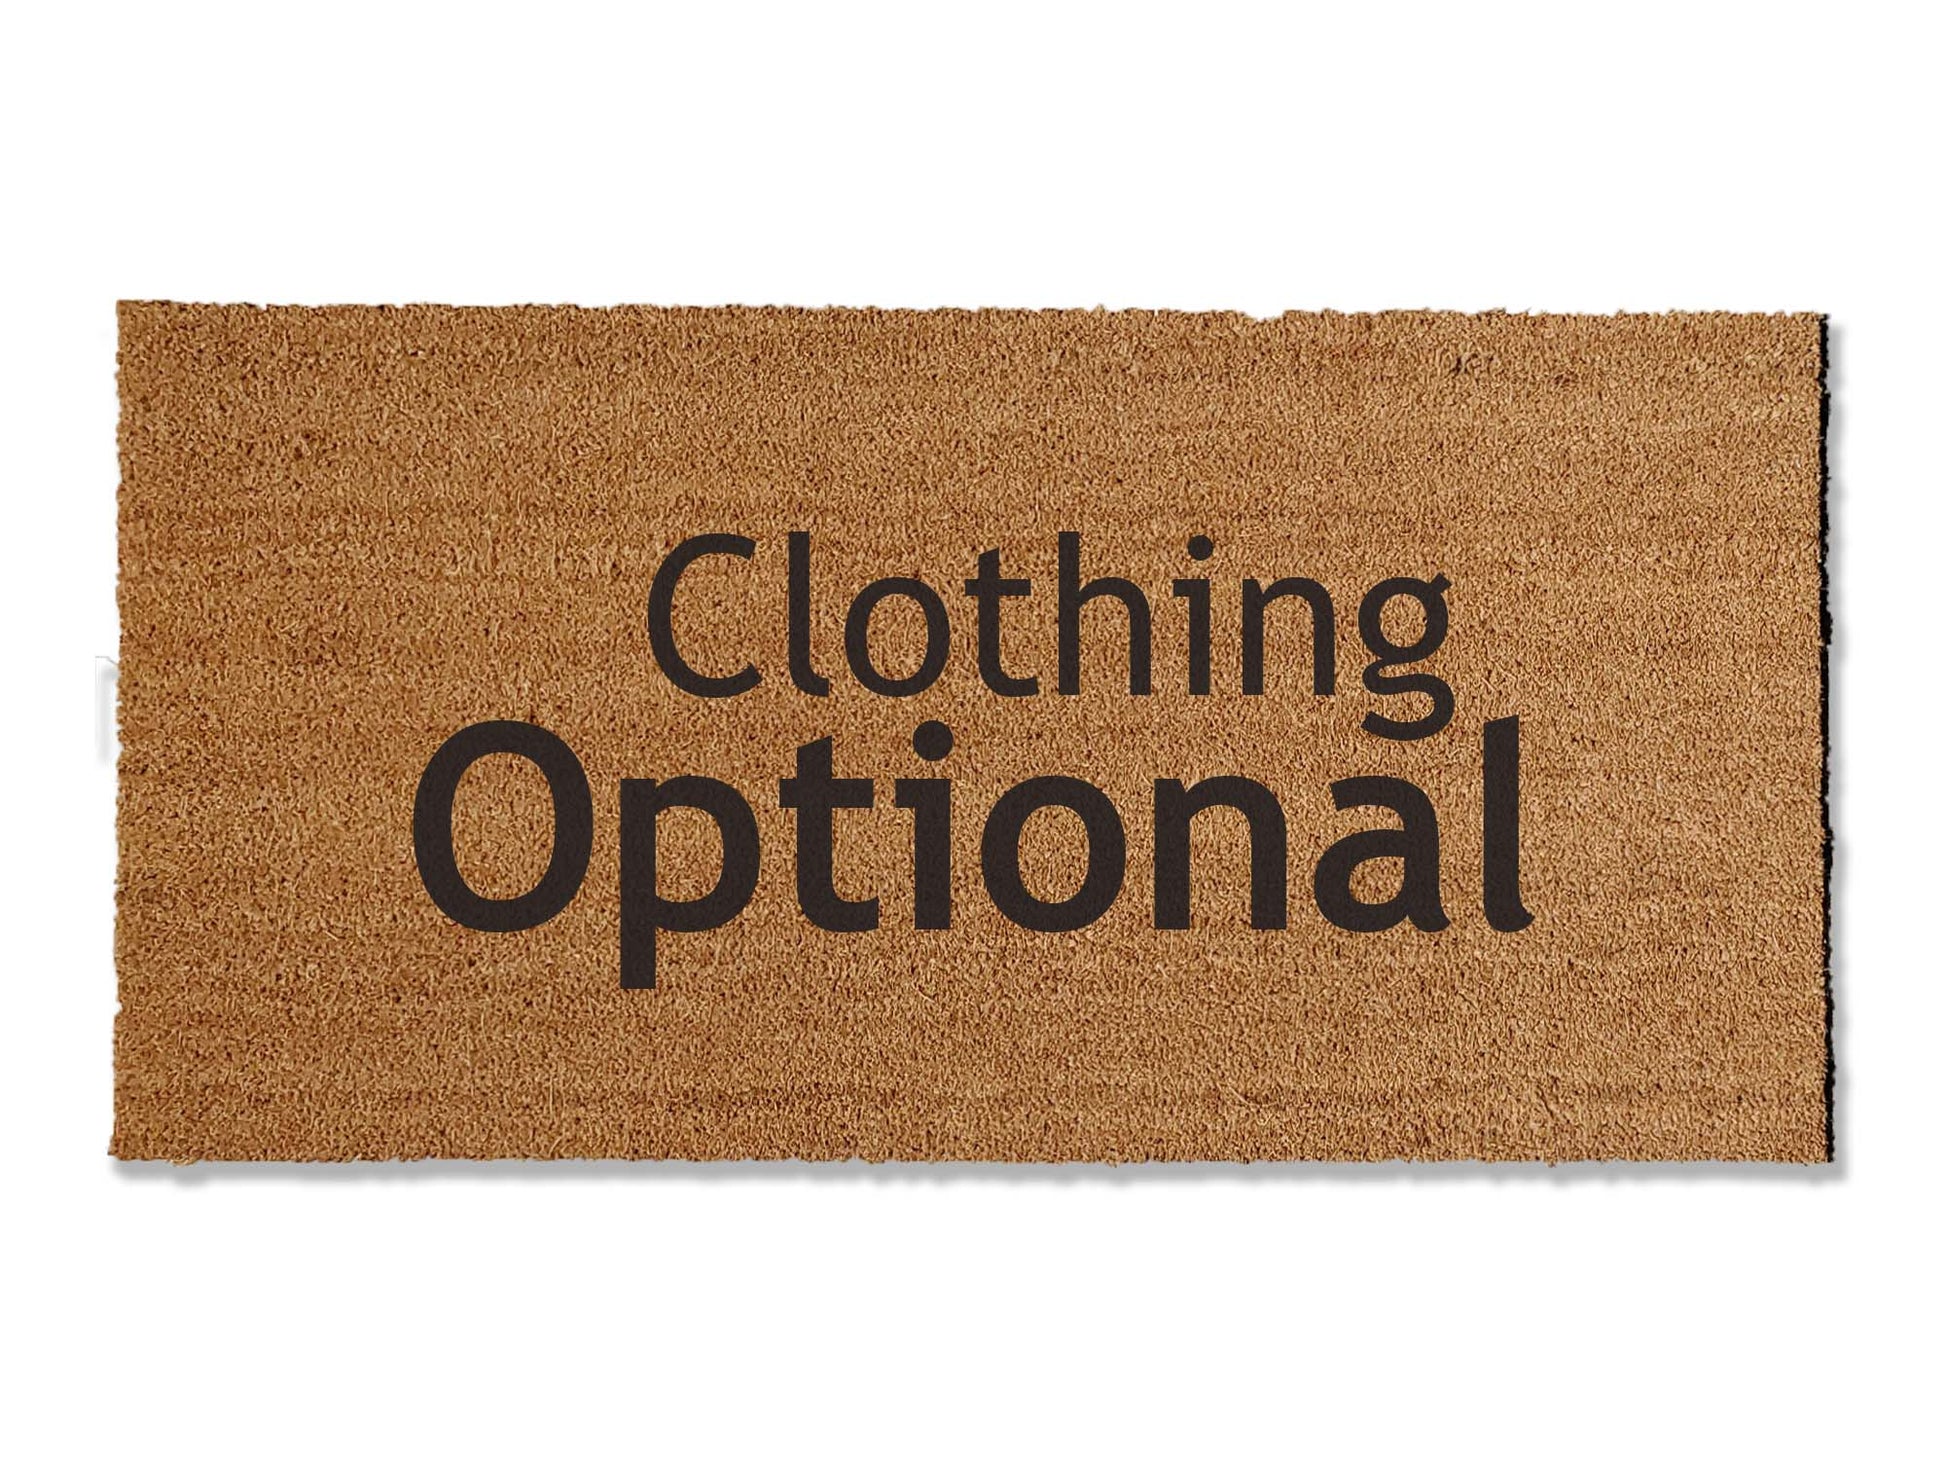 Add a touch of humor to your entryway with our 'Clothing Optional' coir welcome doormat, available in multiple sizes. Spruce up your doorstep and greet guests with a smile!